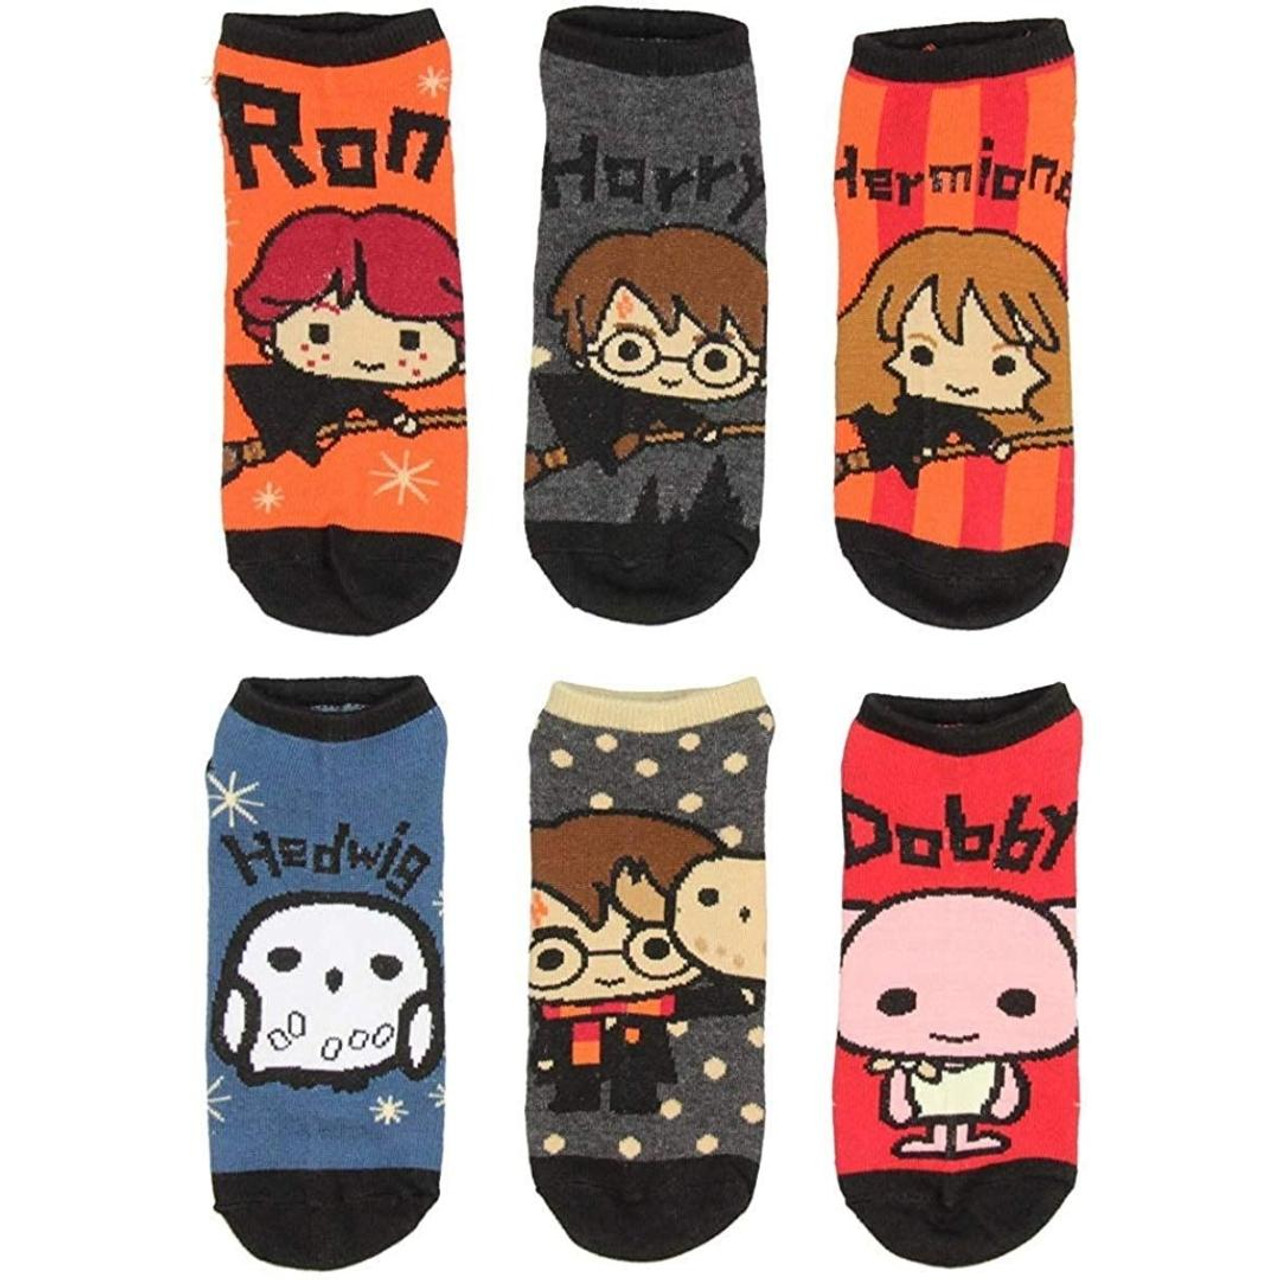 Harry Potter Chibi 6-Pair Pack of Juniors Ankle Socks by Bioworld